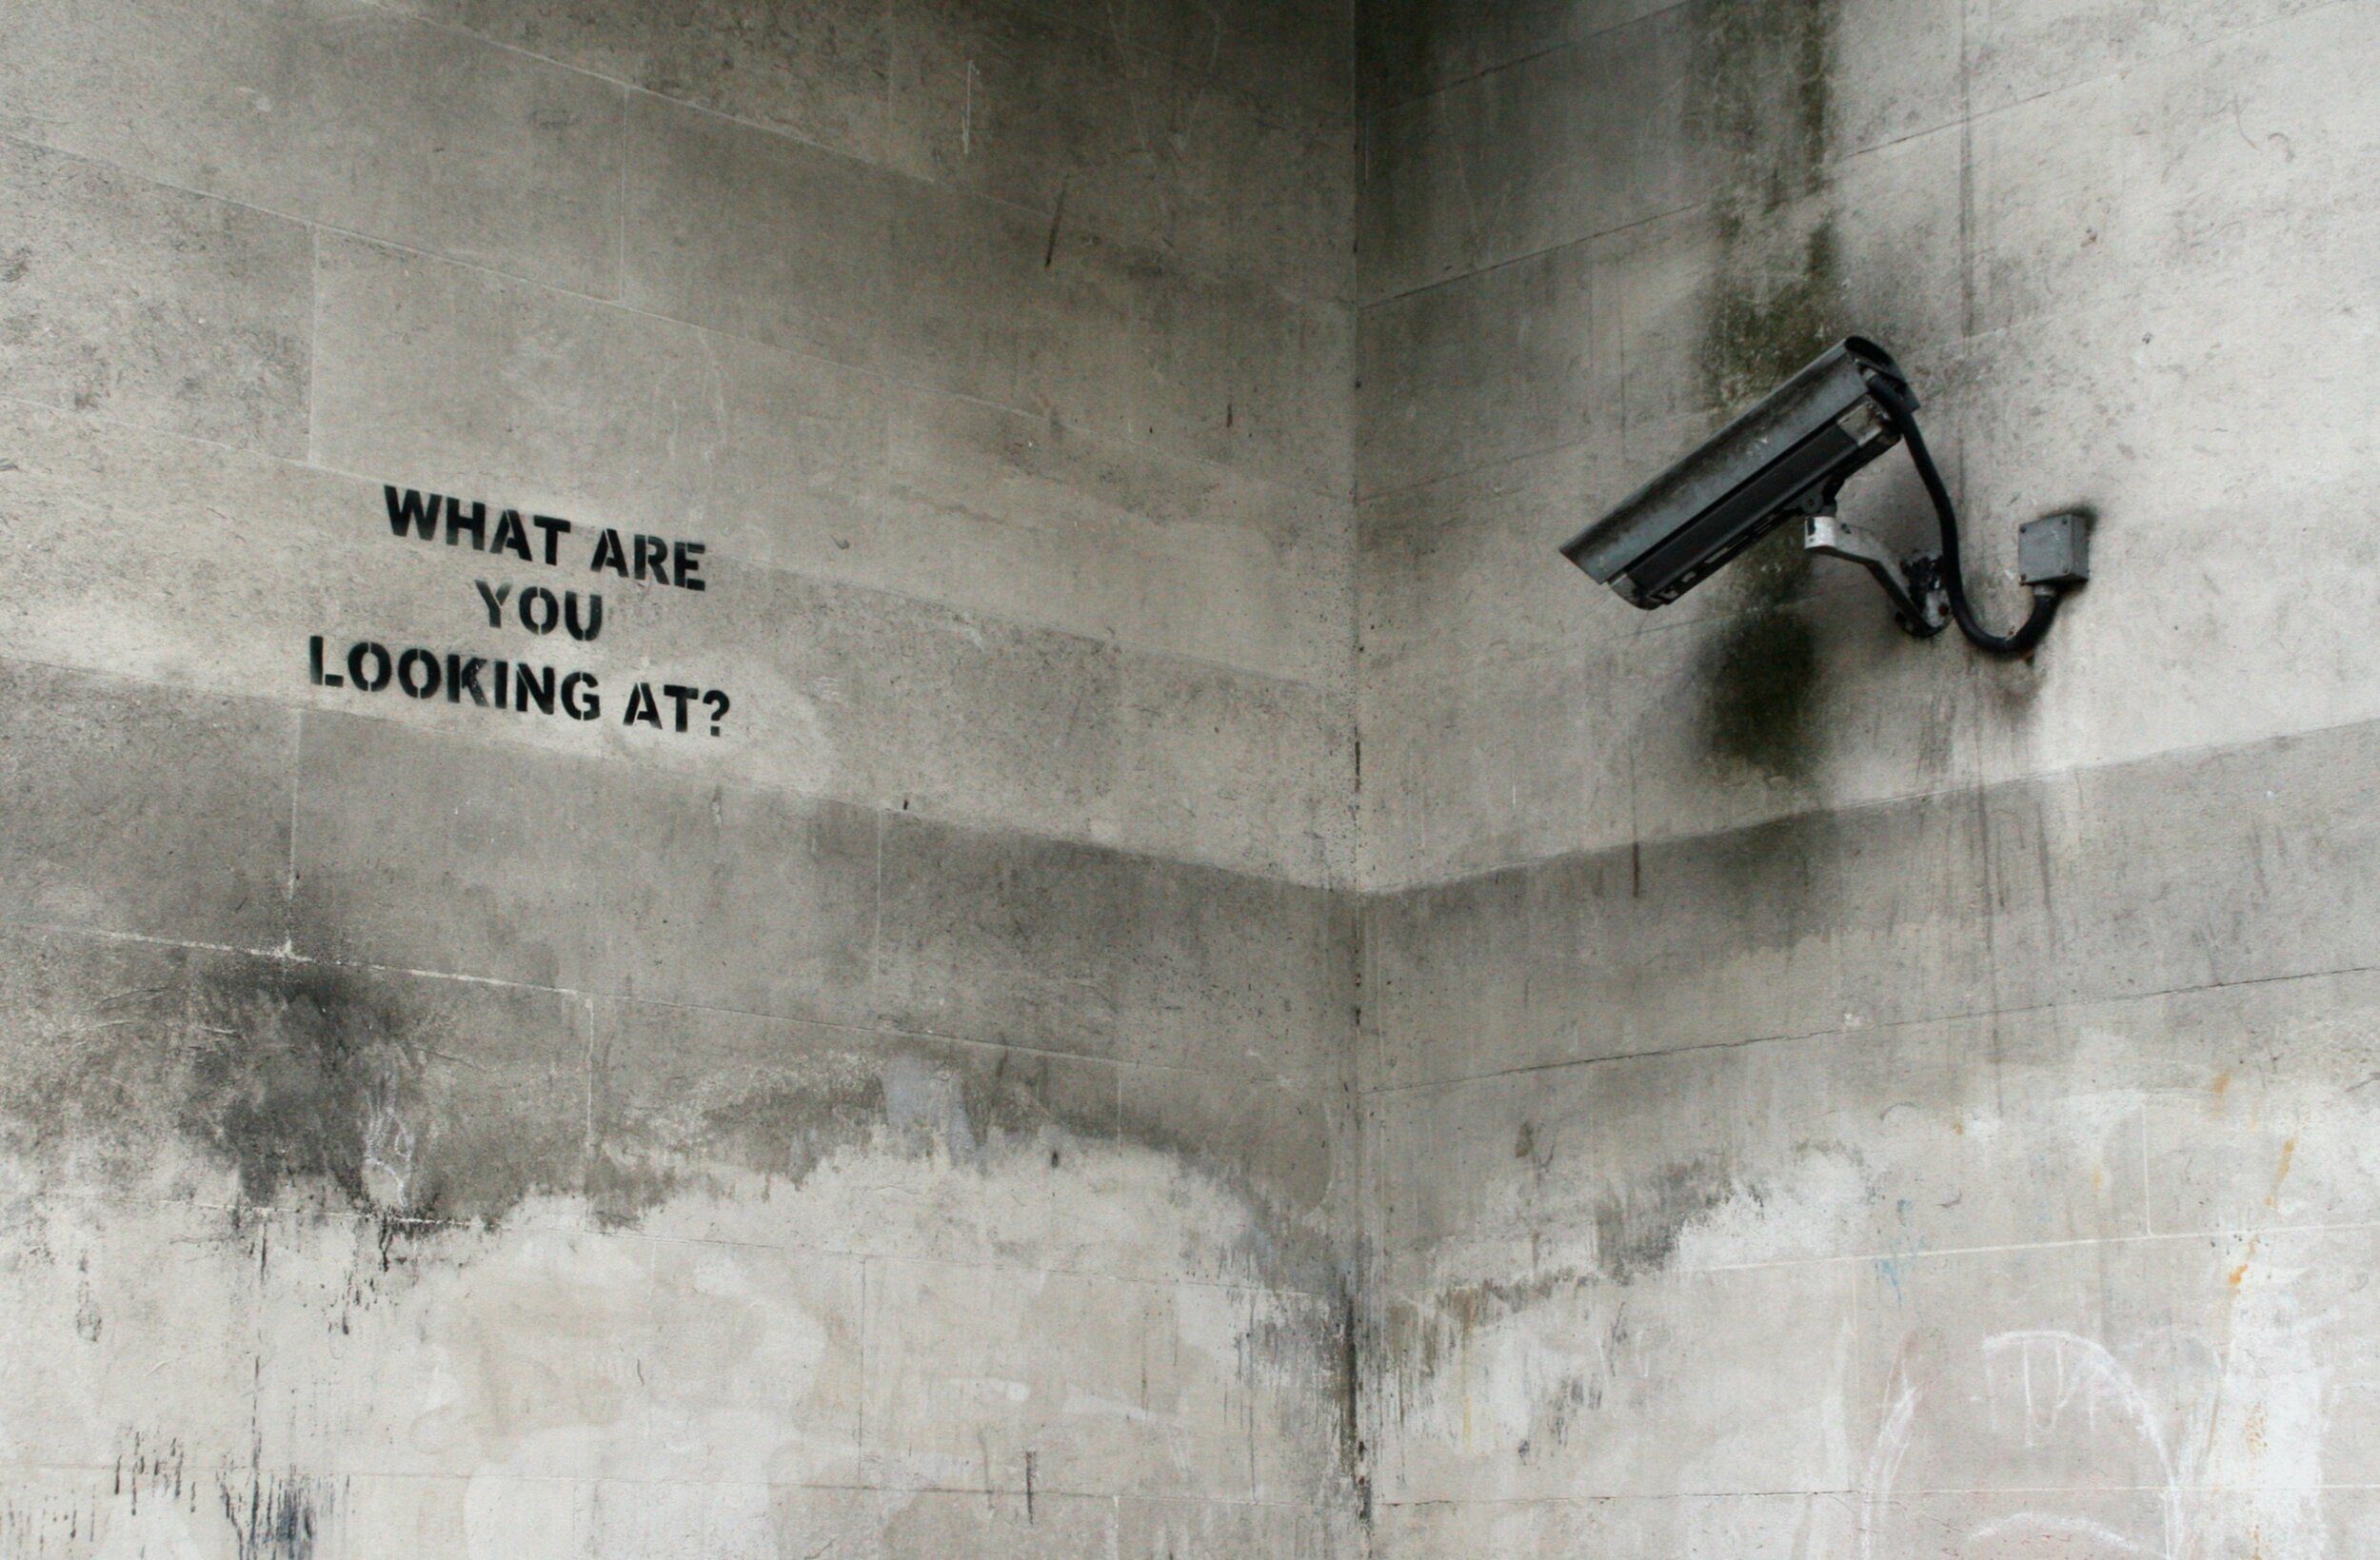 Corner of a concrete wall with CCTV pointing at graffiti saying 'what are you looking at'